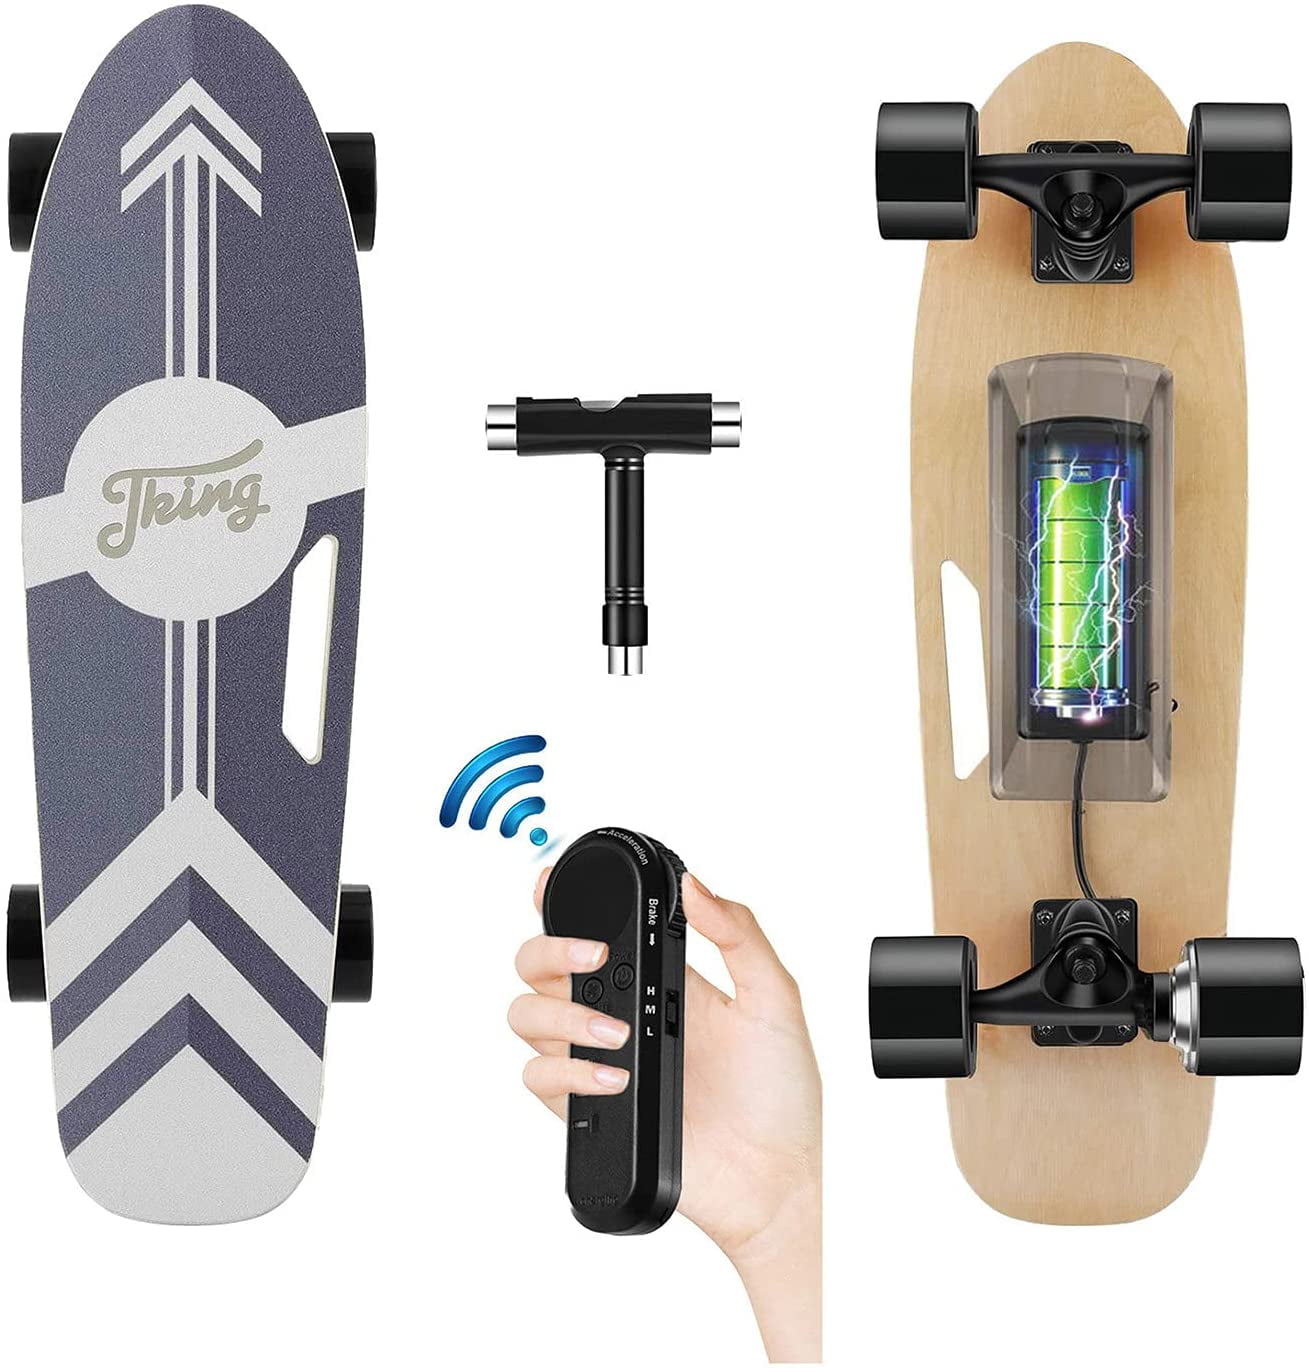 Details about   Maple Deck Electric Skateboard Longboard Crusier with Remote Controller B s h 73 